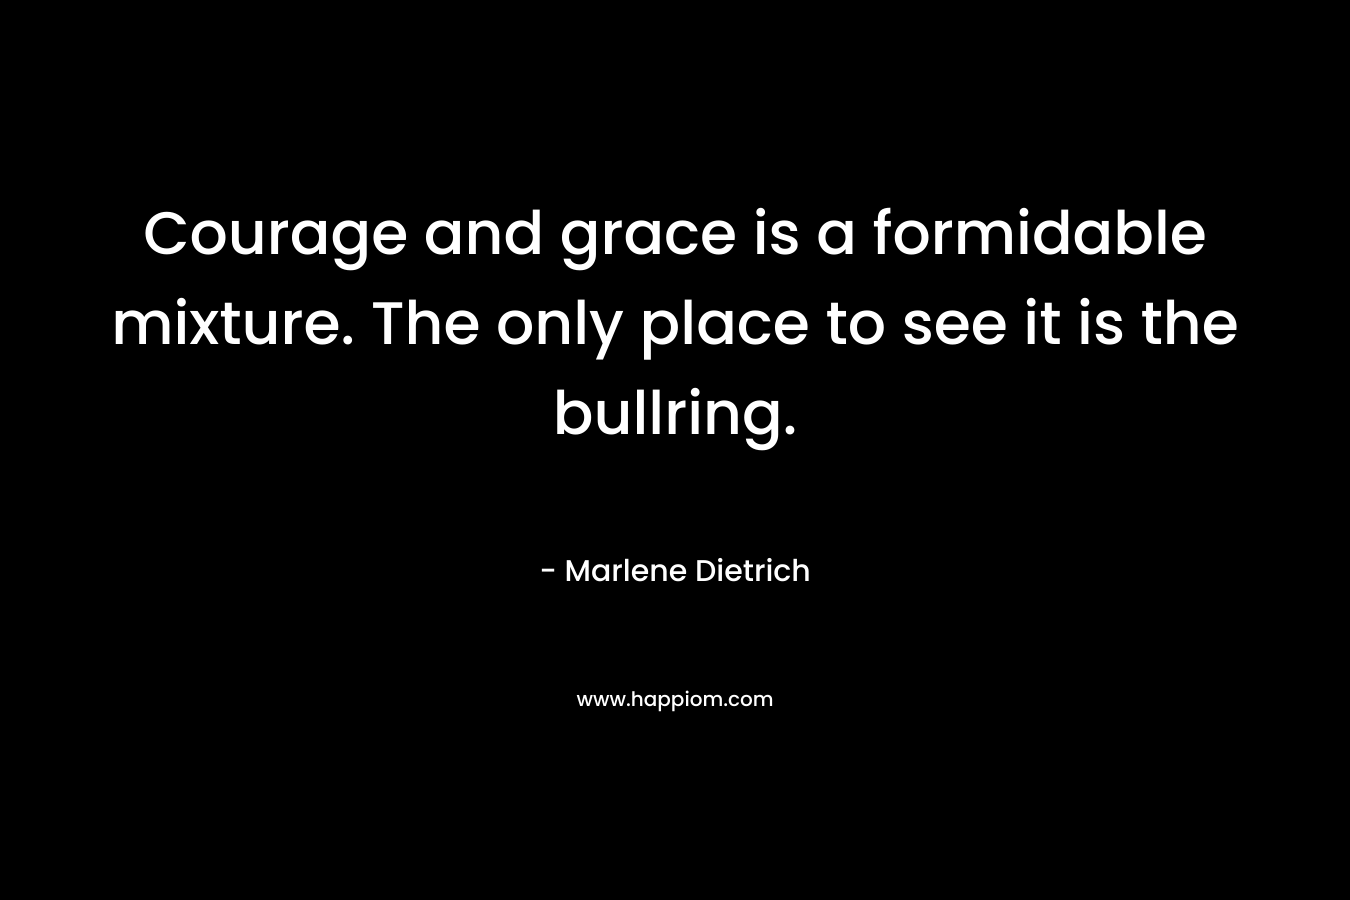 Courage and grace is a formidable mixture. The only place to see it is the bullring. – Marlene Dietrich